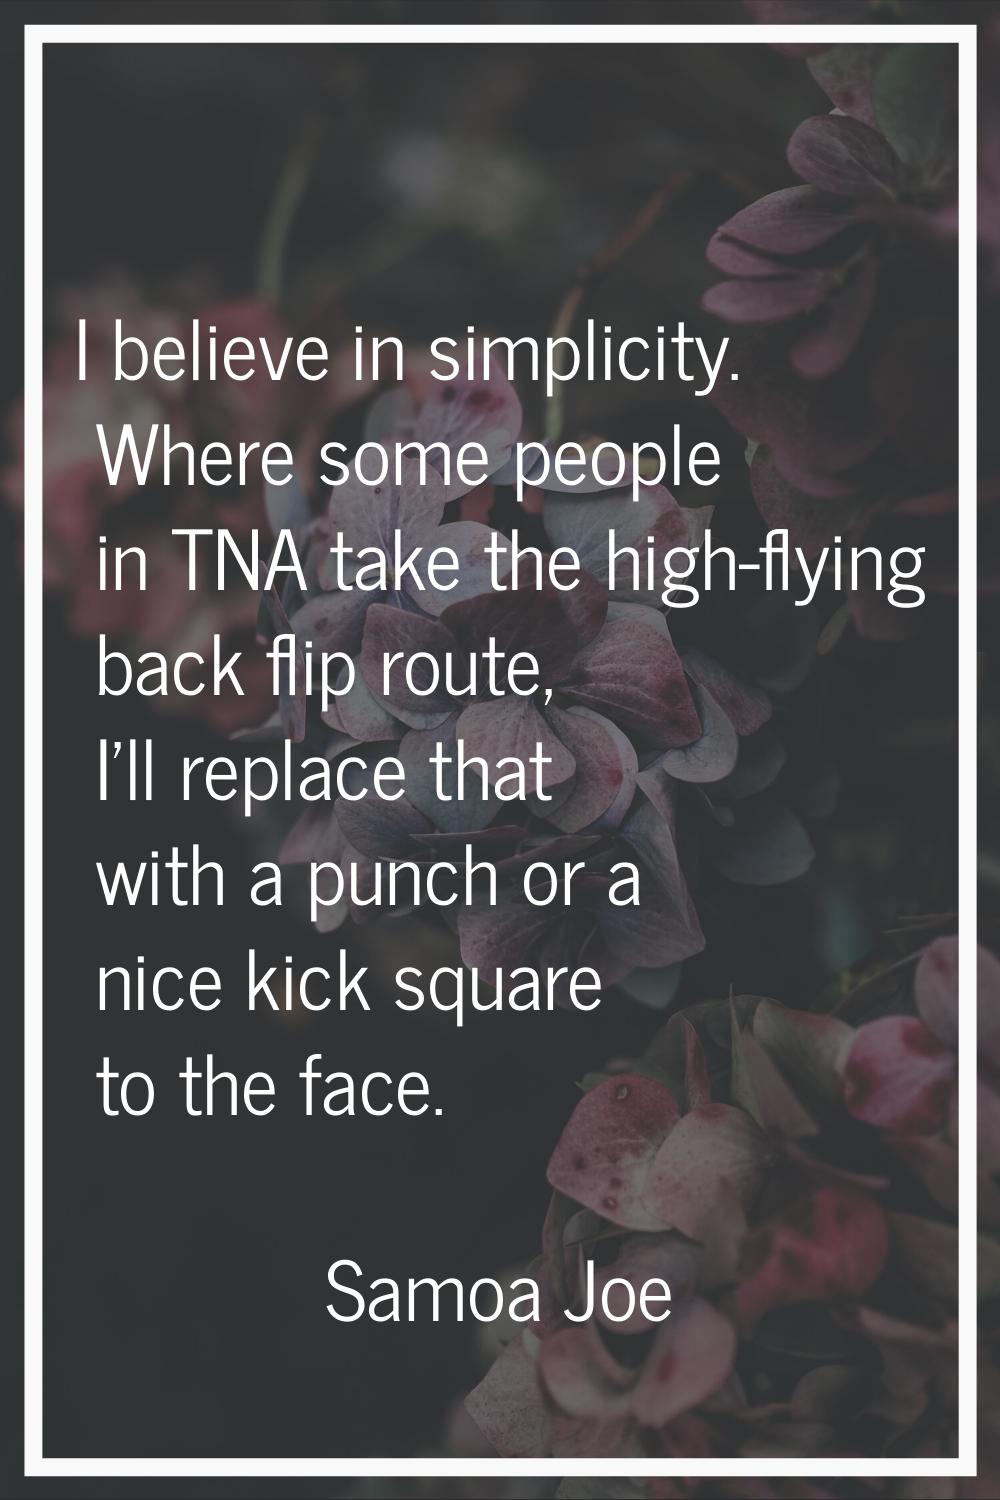 I believe in simplicity. Where some people in TNA take the high-flying back flip route, I'll replac